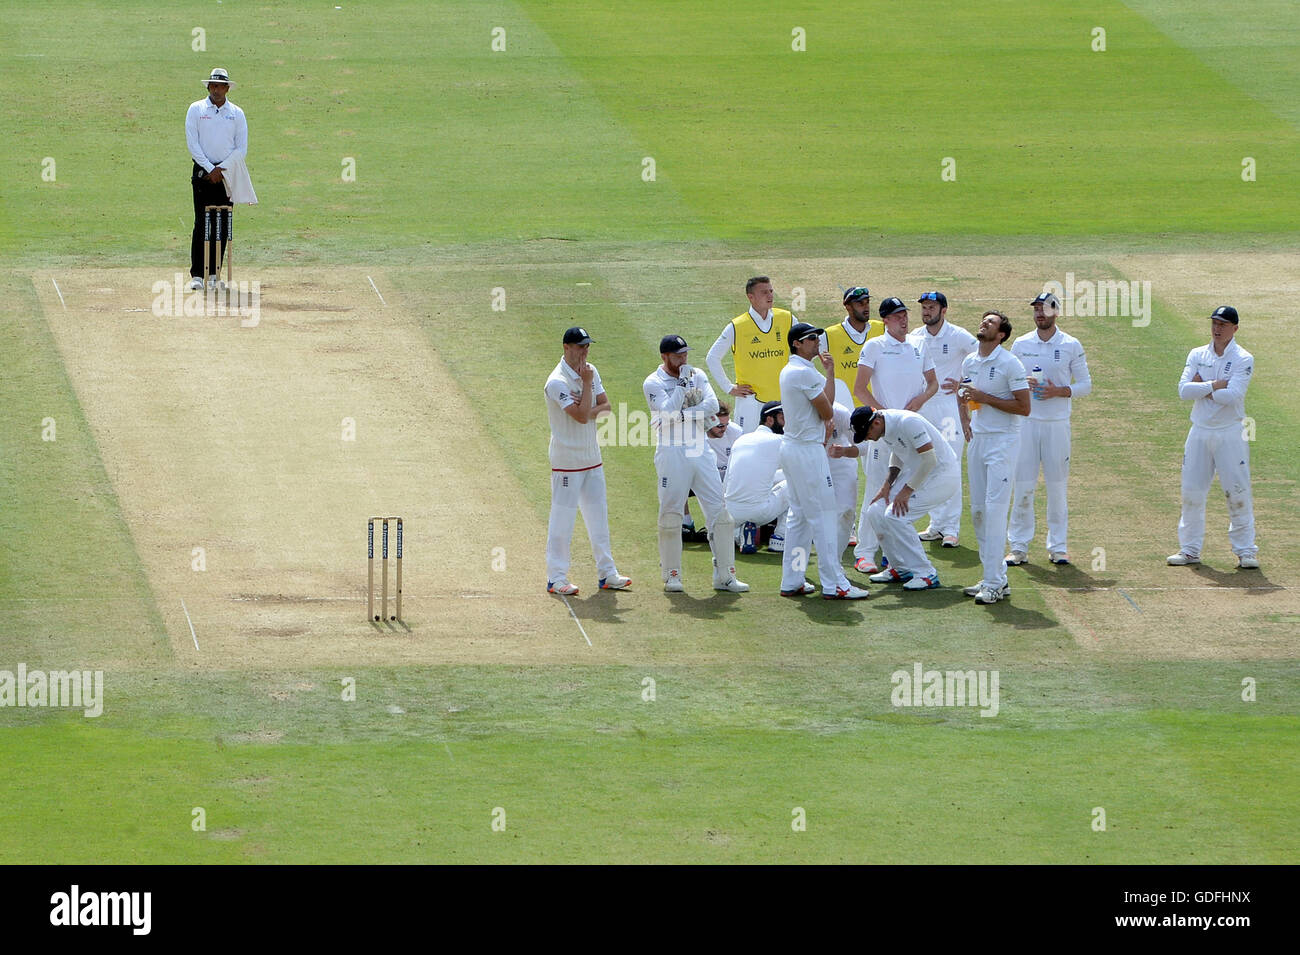 England's Steven Finn (third right) reacts after losing a DRS review following an appeal for the wicket of Pakistan's Asad Shafiq (not pictured) during day three of the Investec Test match at Lord's, London. Stock Photo